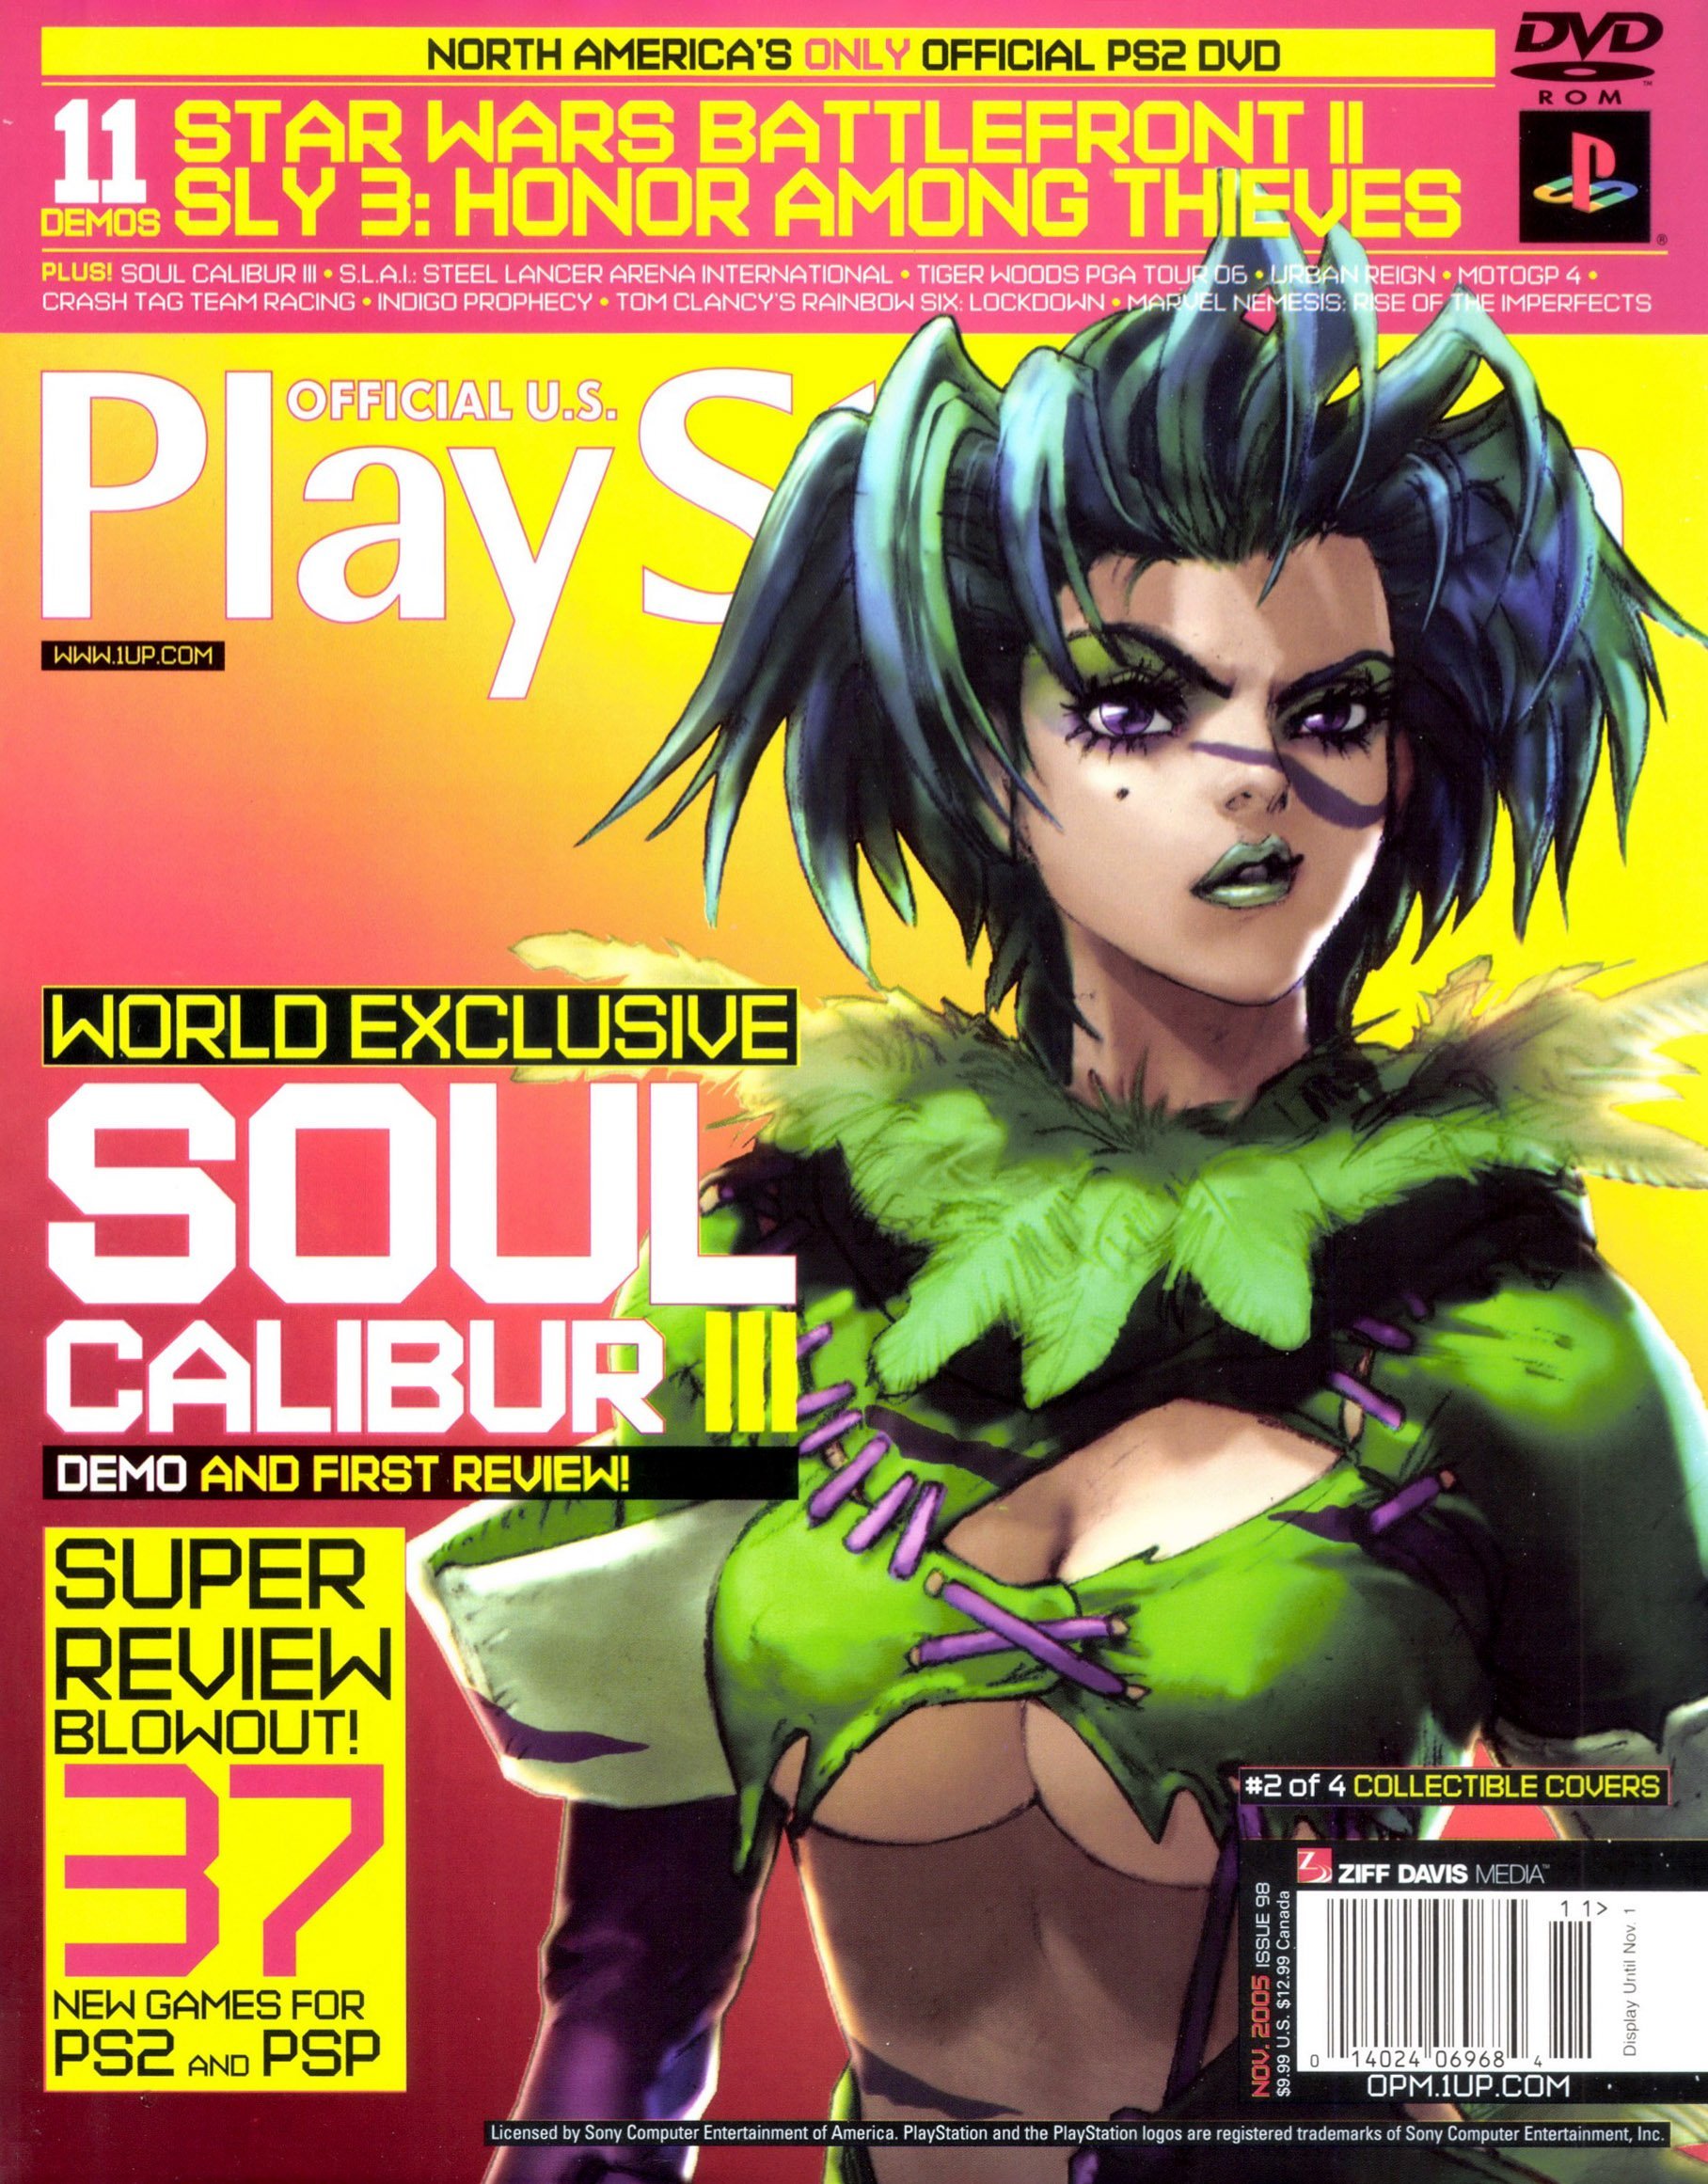 Official U.S. Playstation Magazine Issue 098 (November 2005)